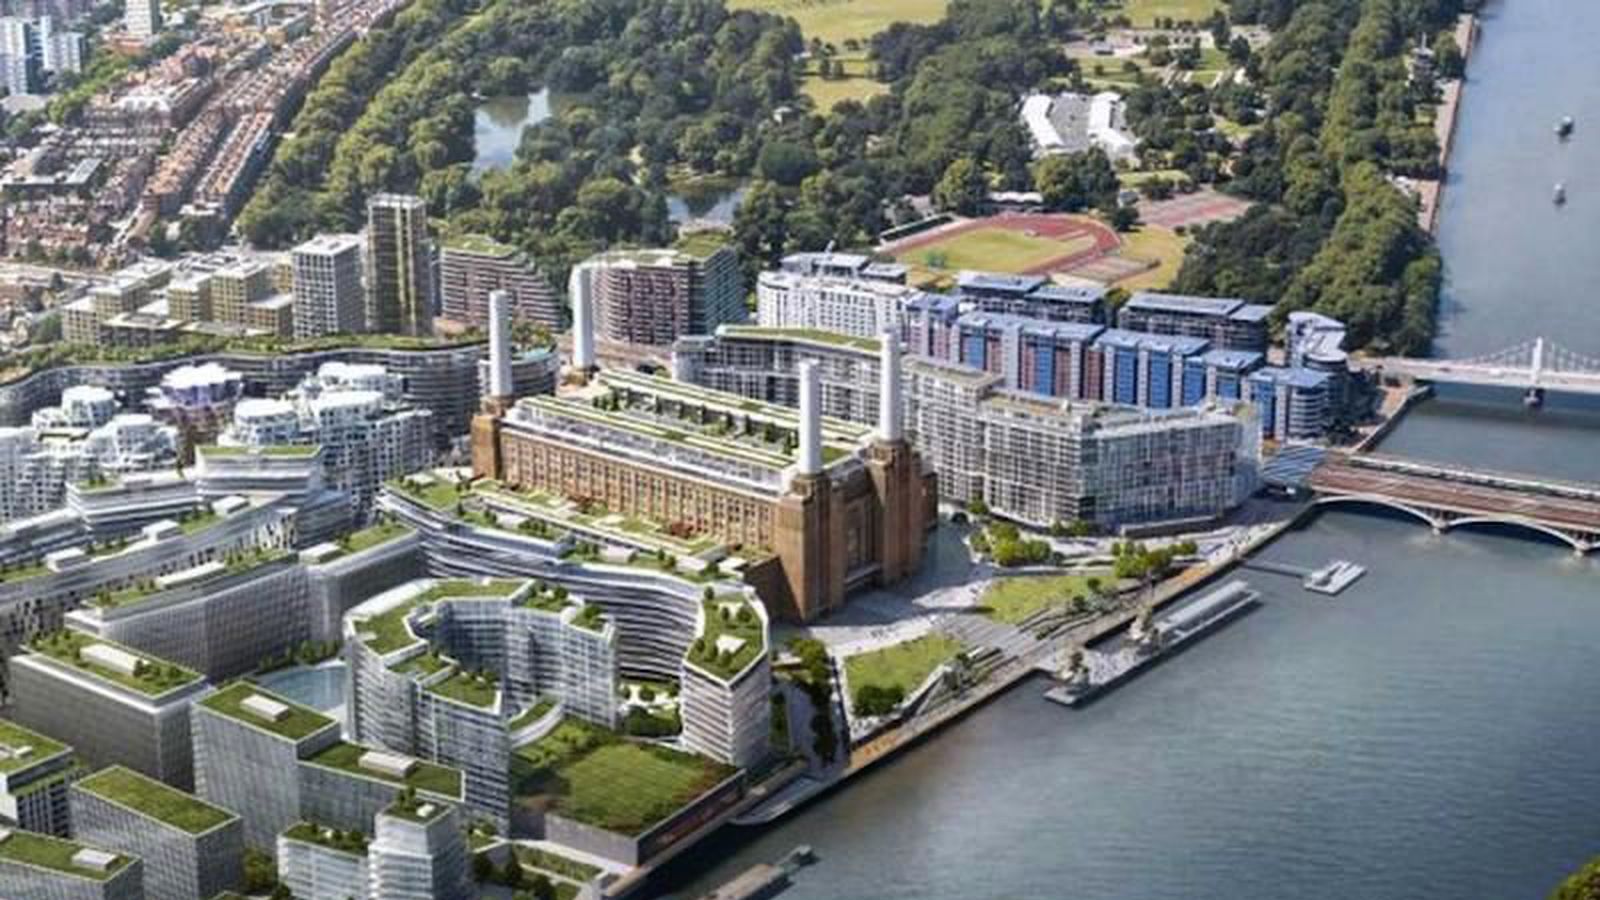 New Apple Campus in London's Battersea Power Station to Open in Early 2023